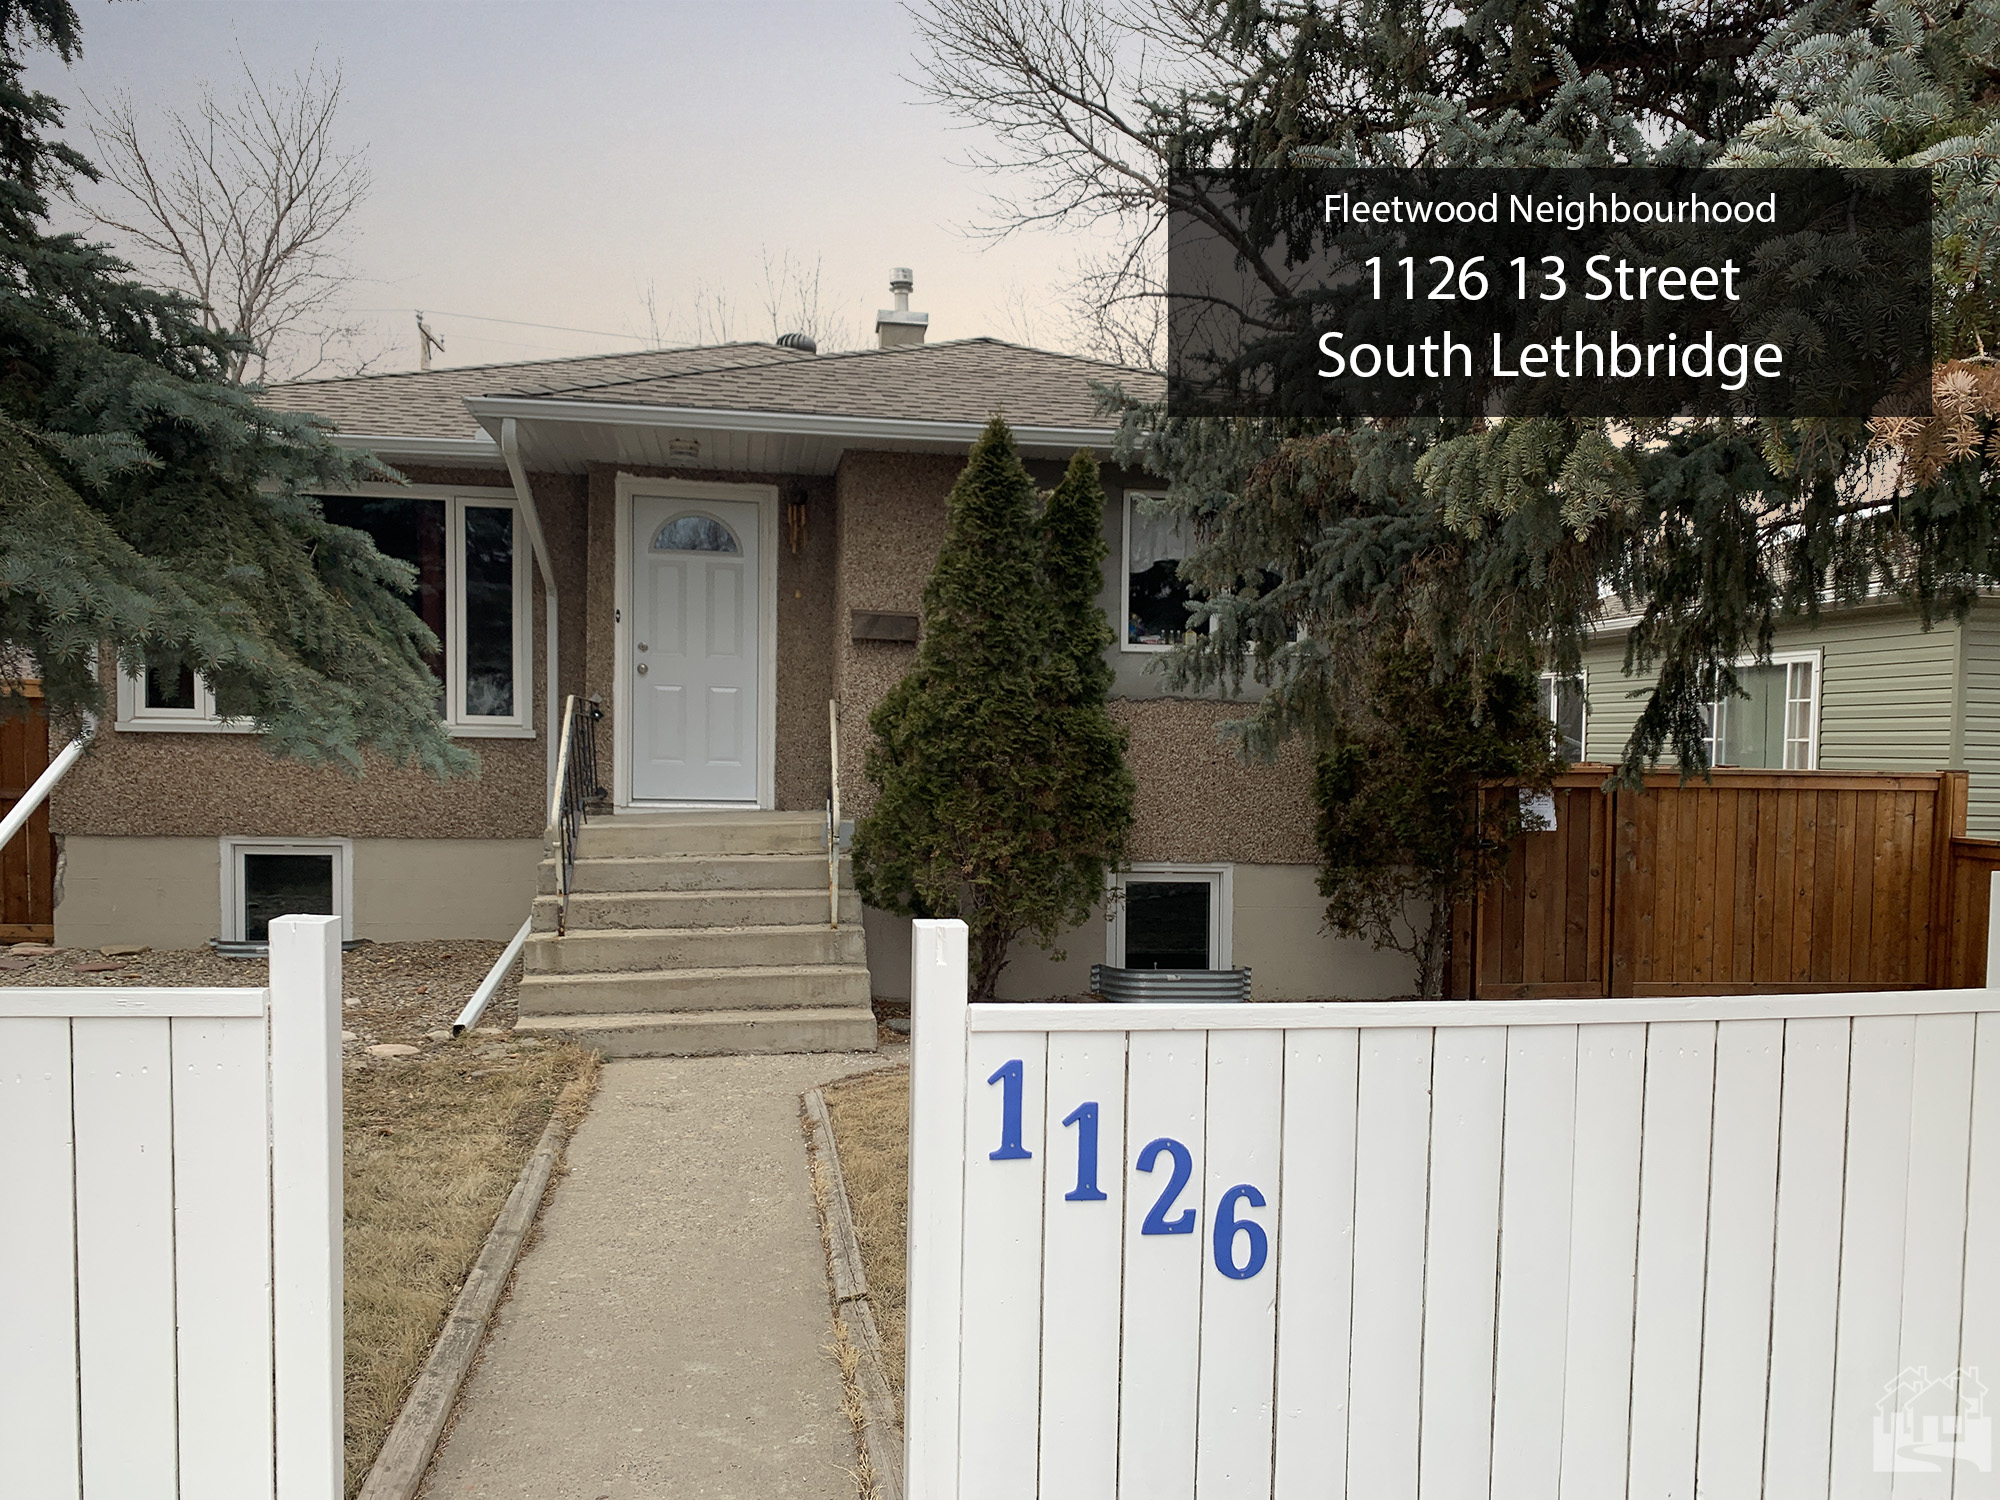 1126 13 Street South Lethbridge (Lower Suite) Cover image